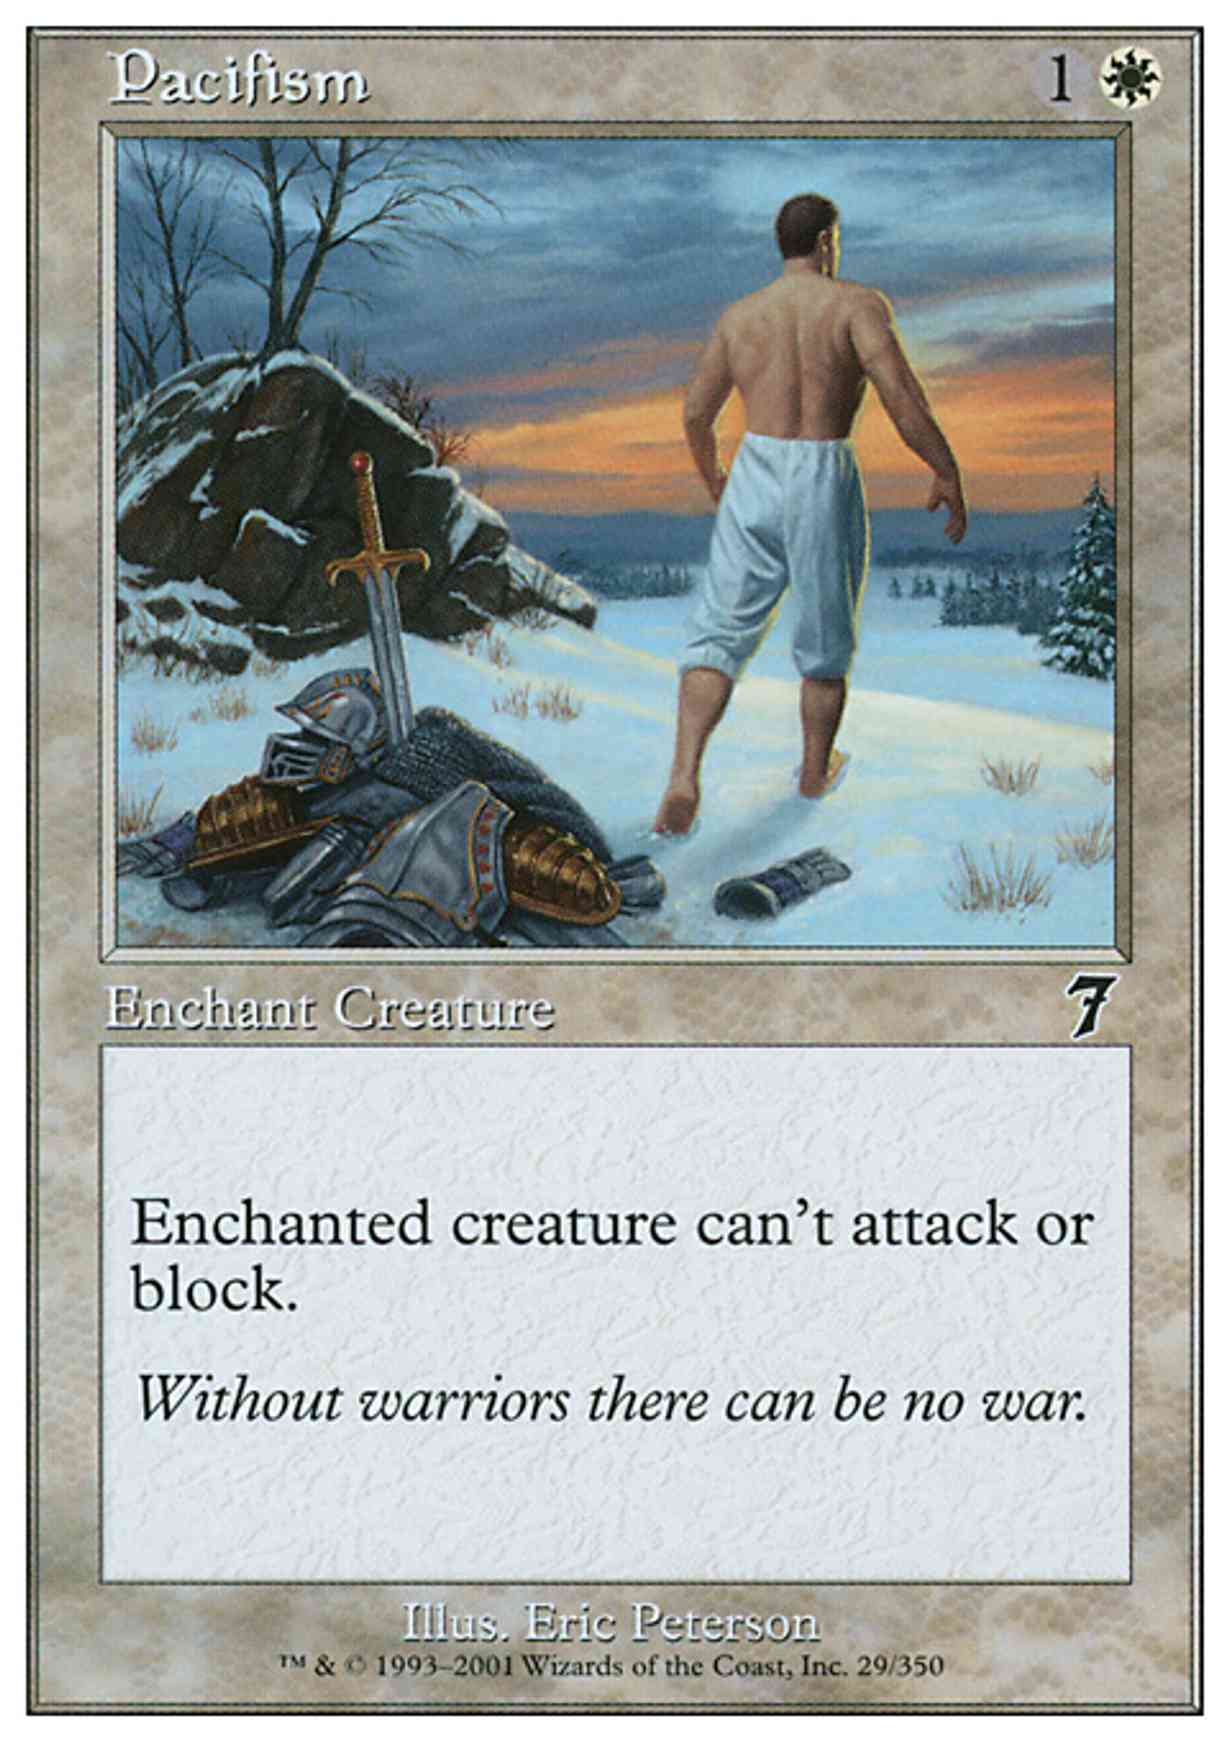 Pacifism magic card front